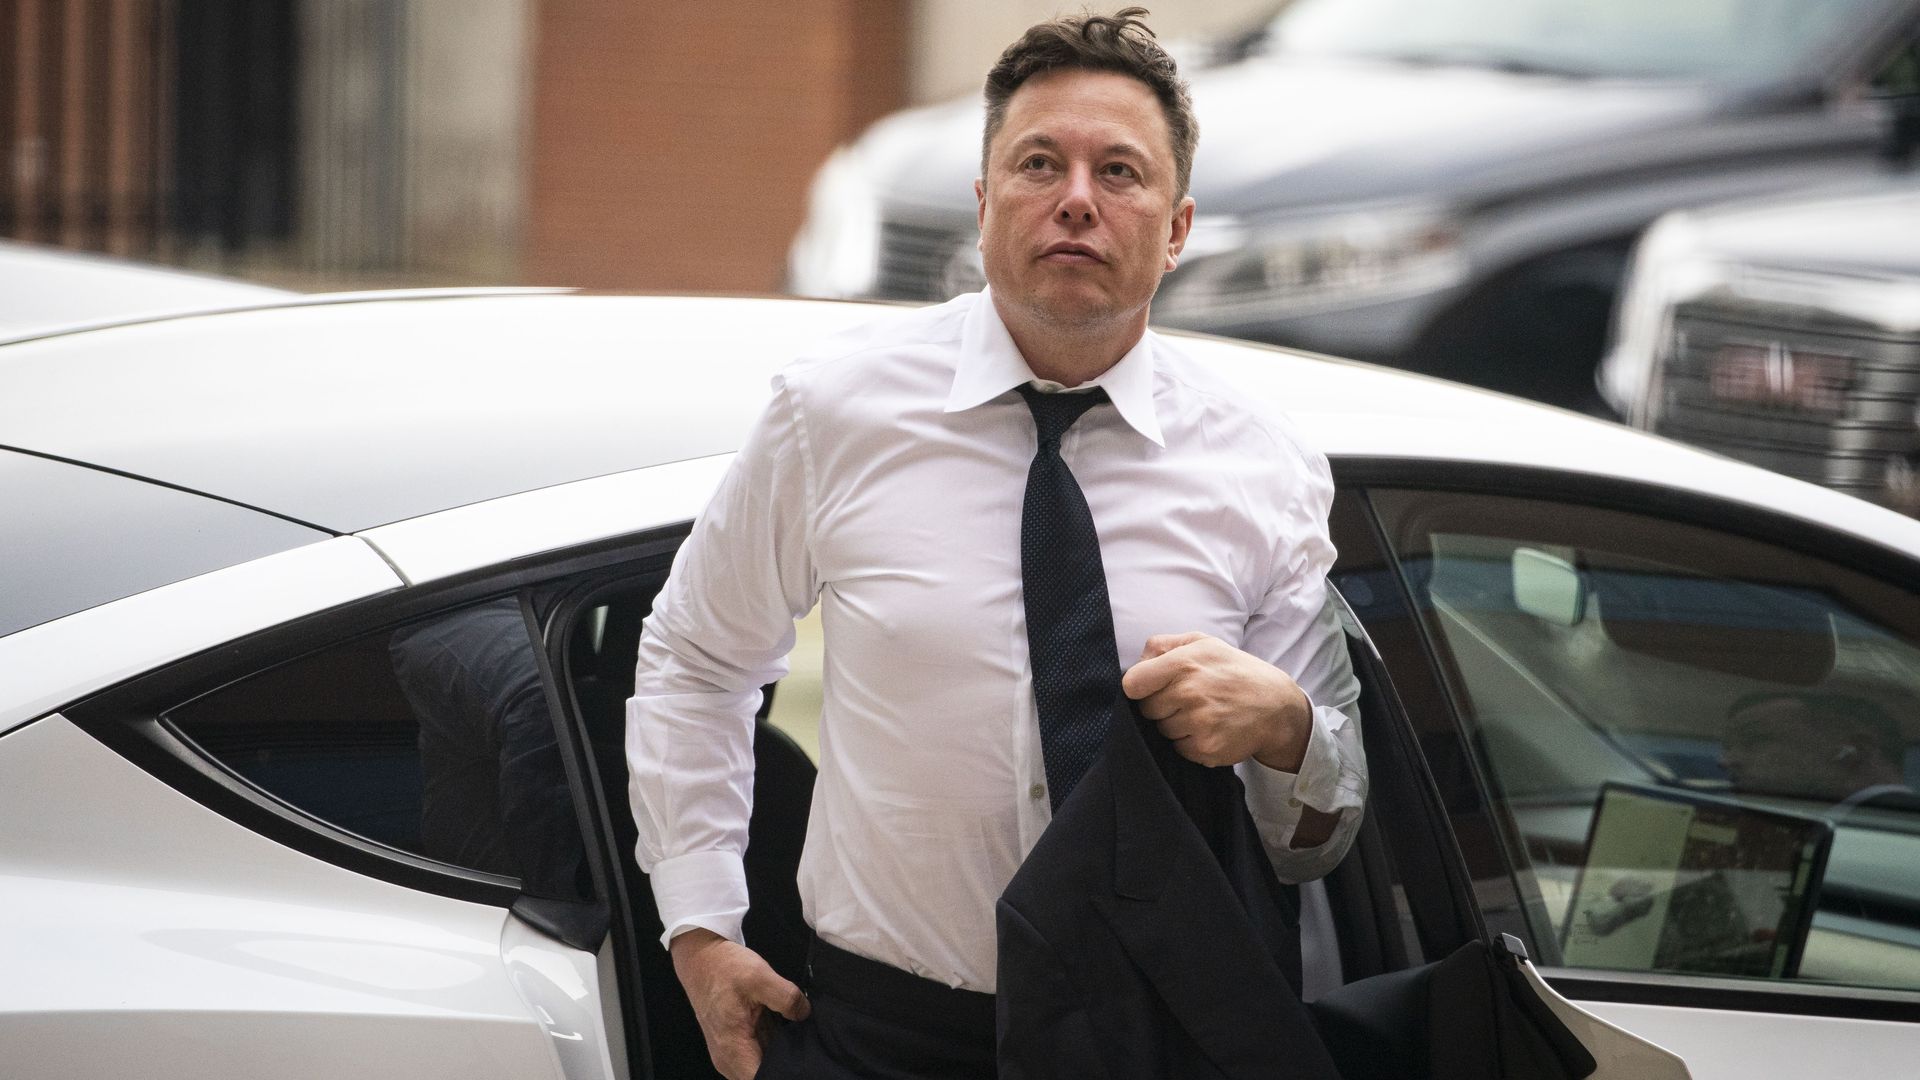 Elon Musk arrives at court during the SolarCity trial in Wilmington, Delaware, U.S., on Tuesday, July 13, 2021. Photographer: Al Drago/Bloomberg via Getty Images